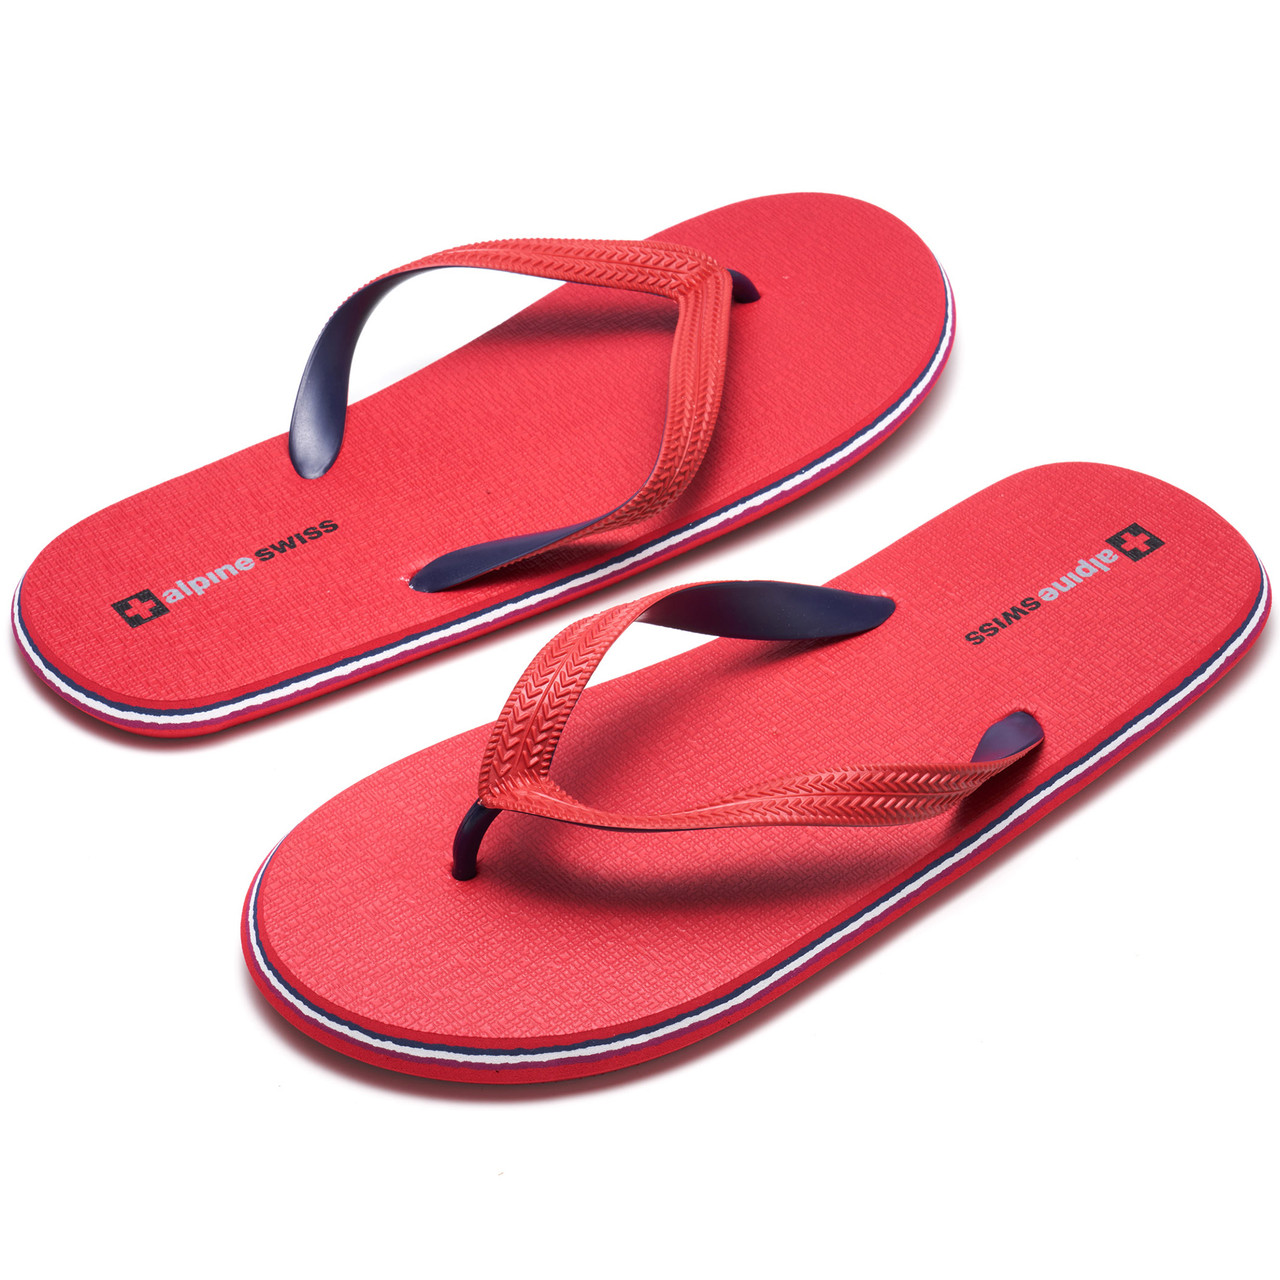 Mens Casual Sports Beach Sandals Summer Flip Flops Leather Shoes